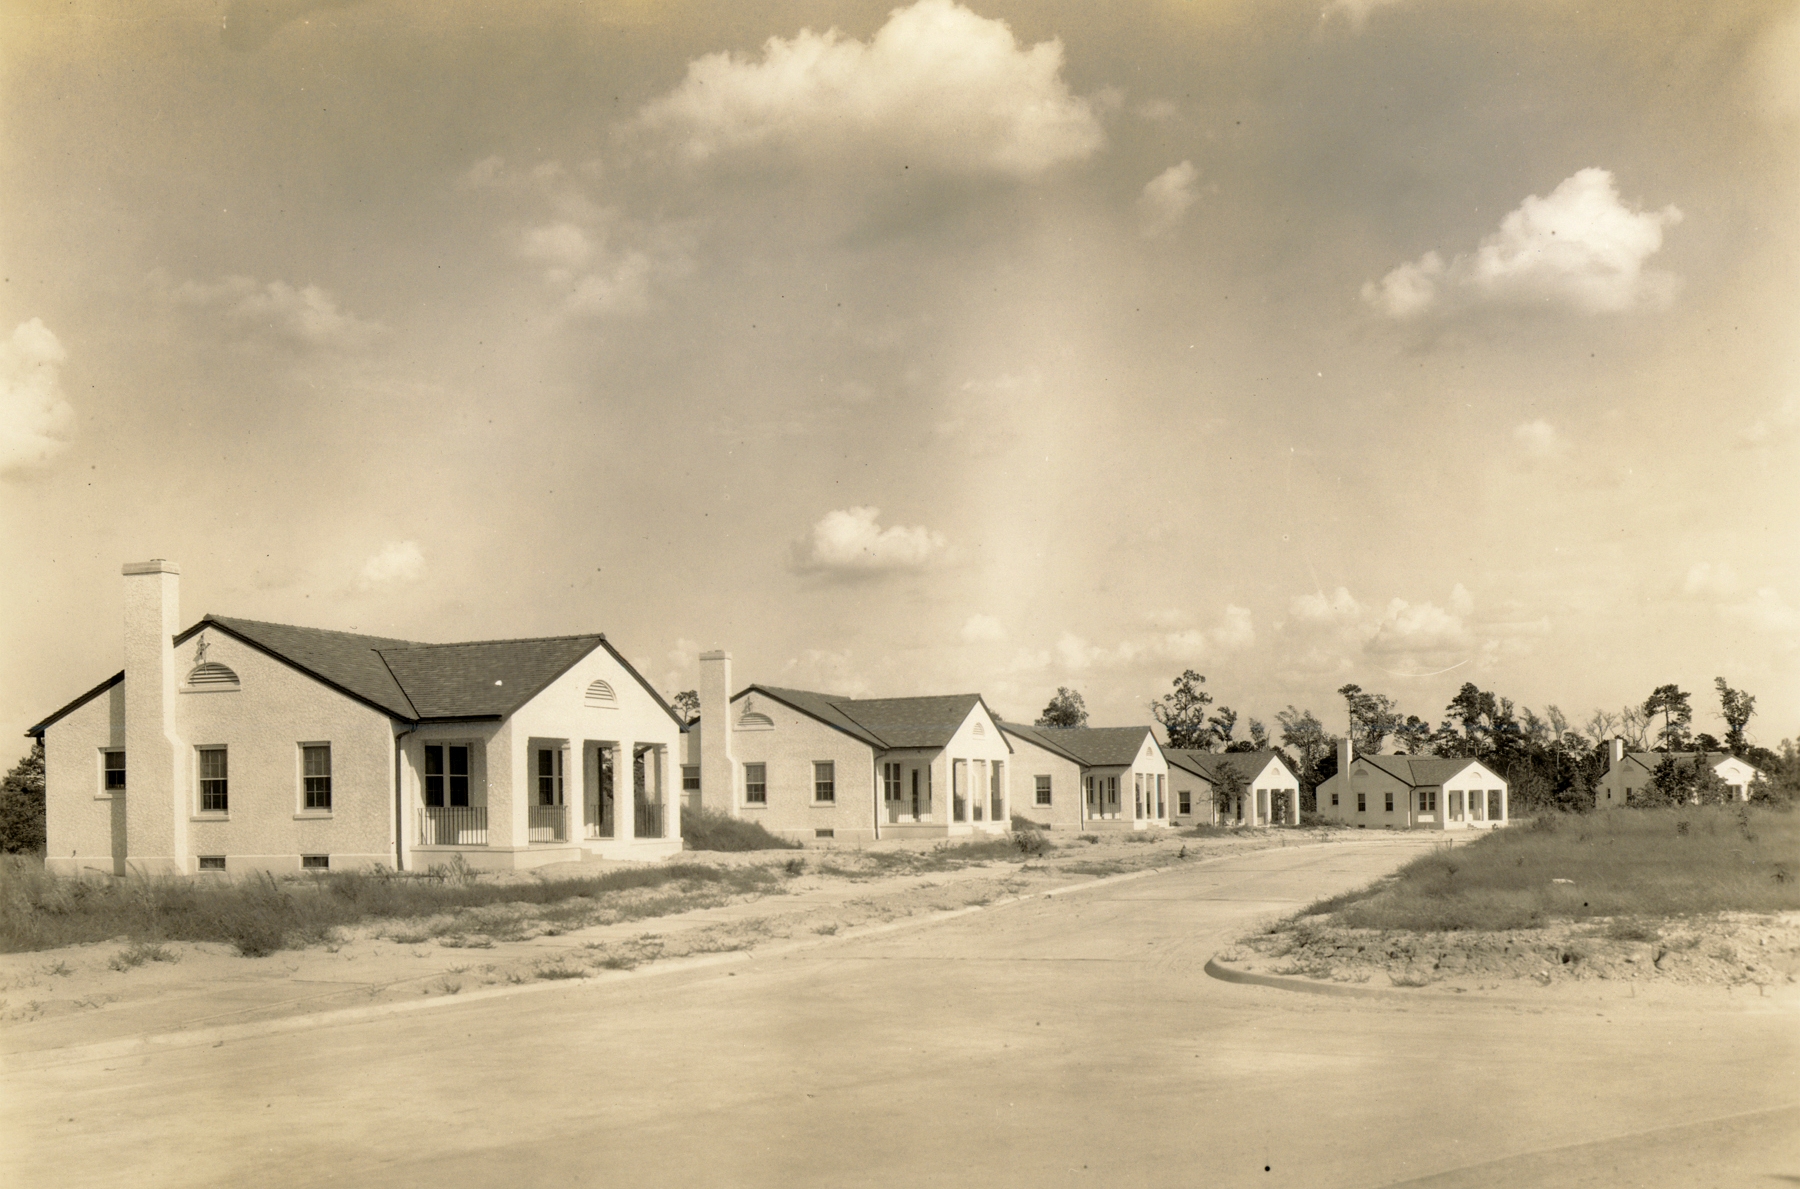 The historic NCO Spanish Eclectic bungalows on Pope Army Airfield, circa 1933 